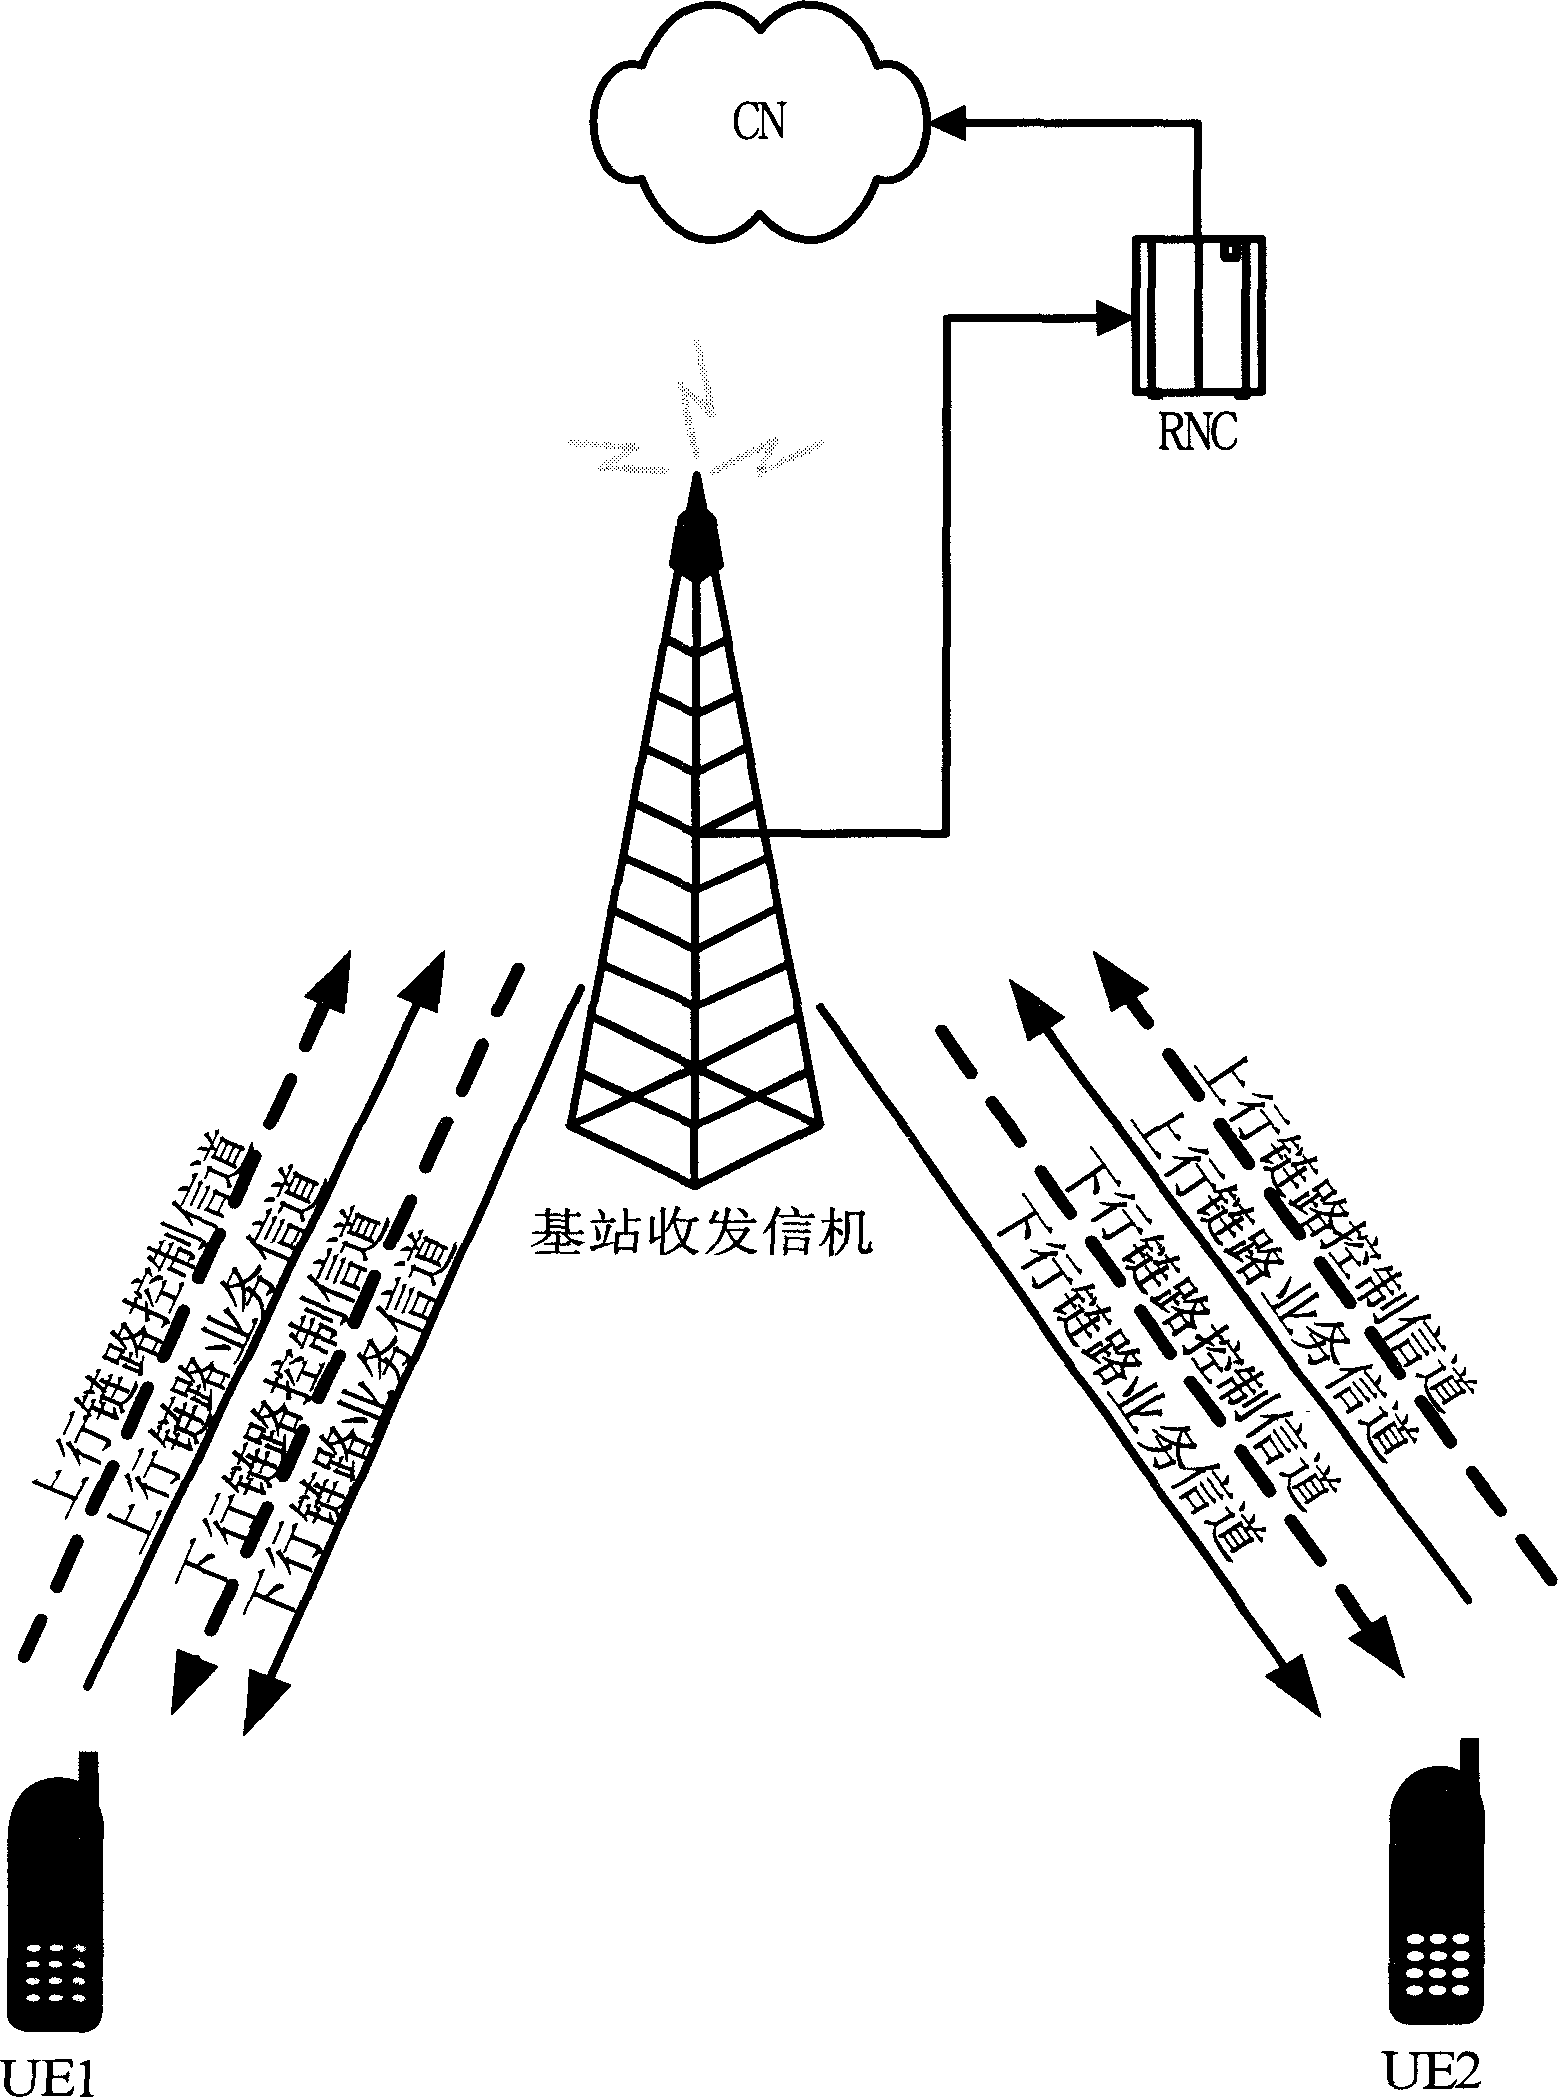 Method and apparatus for establishing point-to-point communication between subscriber terminals in different cells